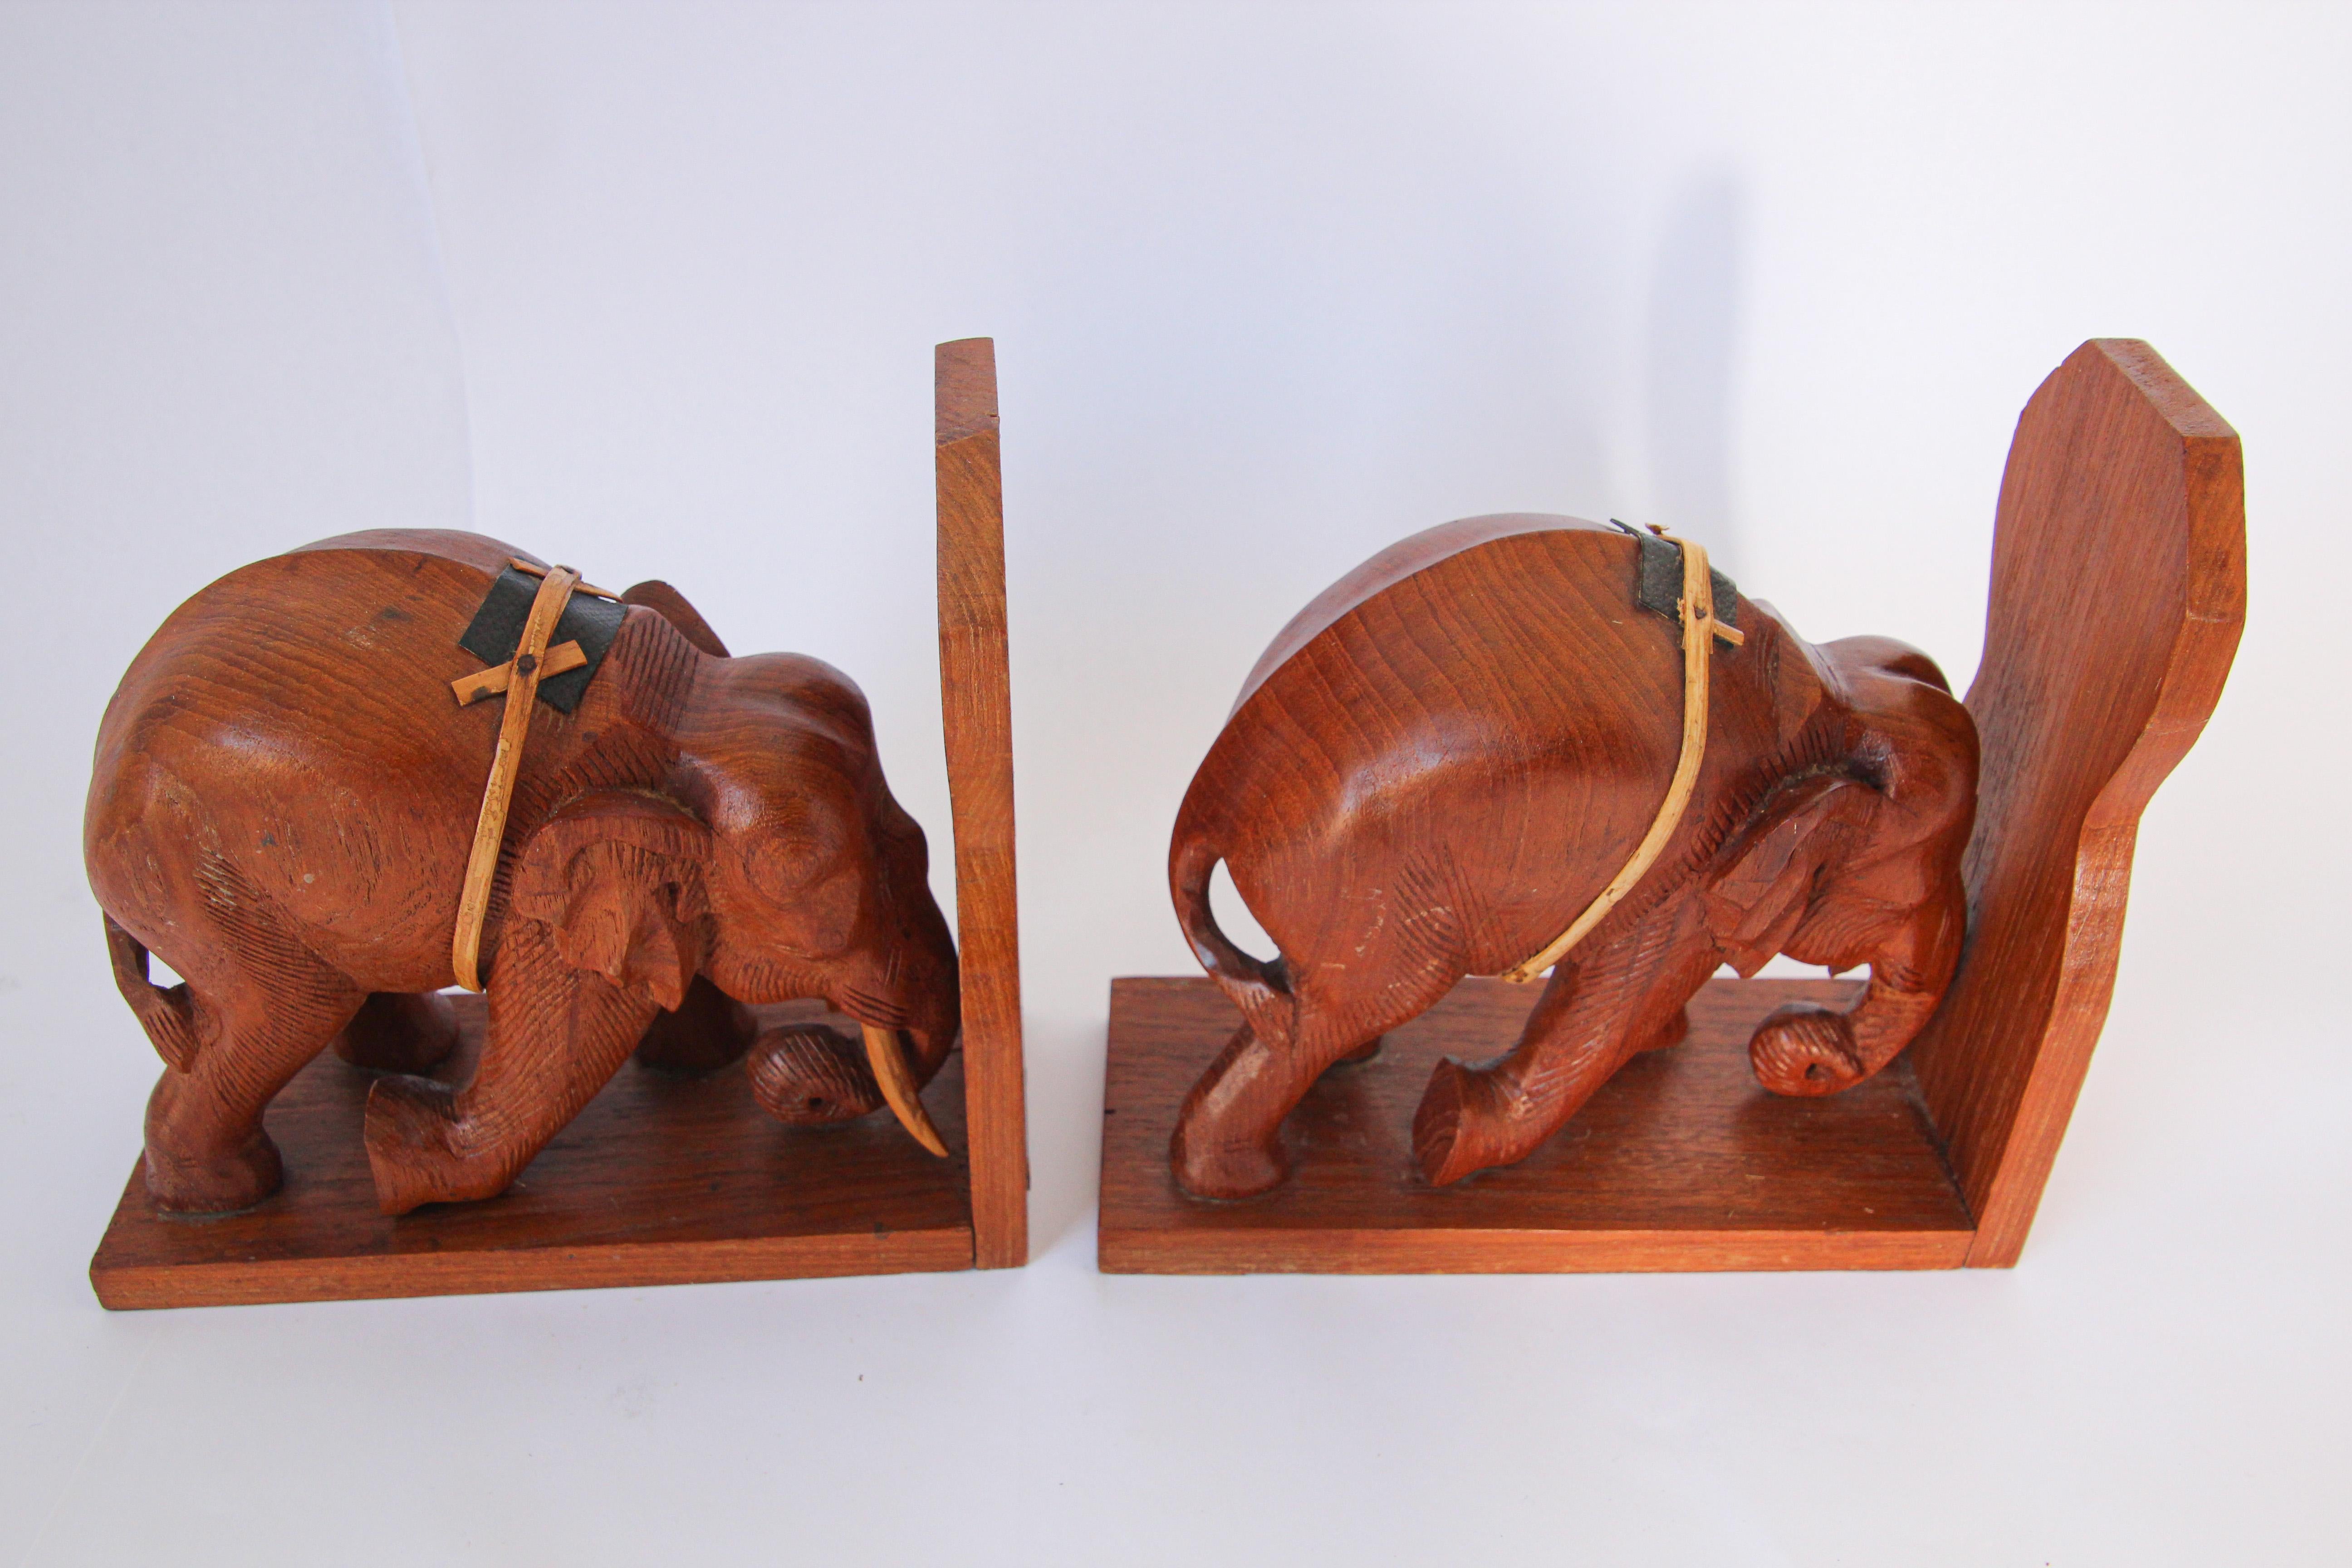 20th Century Hand Carved Wooden Elephant Bookends, circa 1950